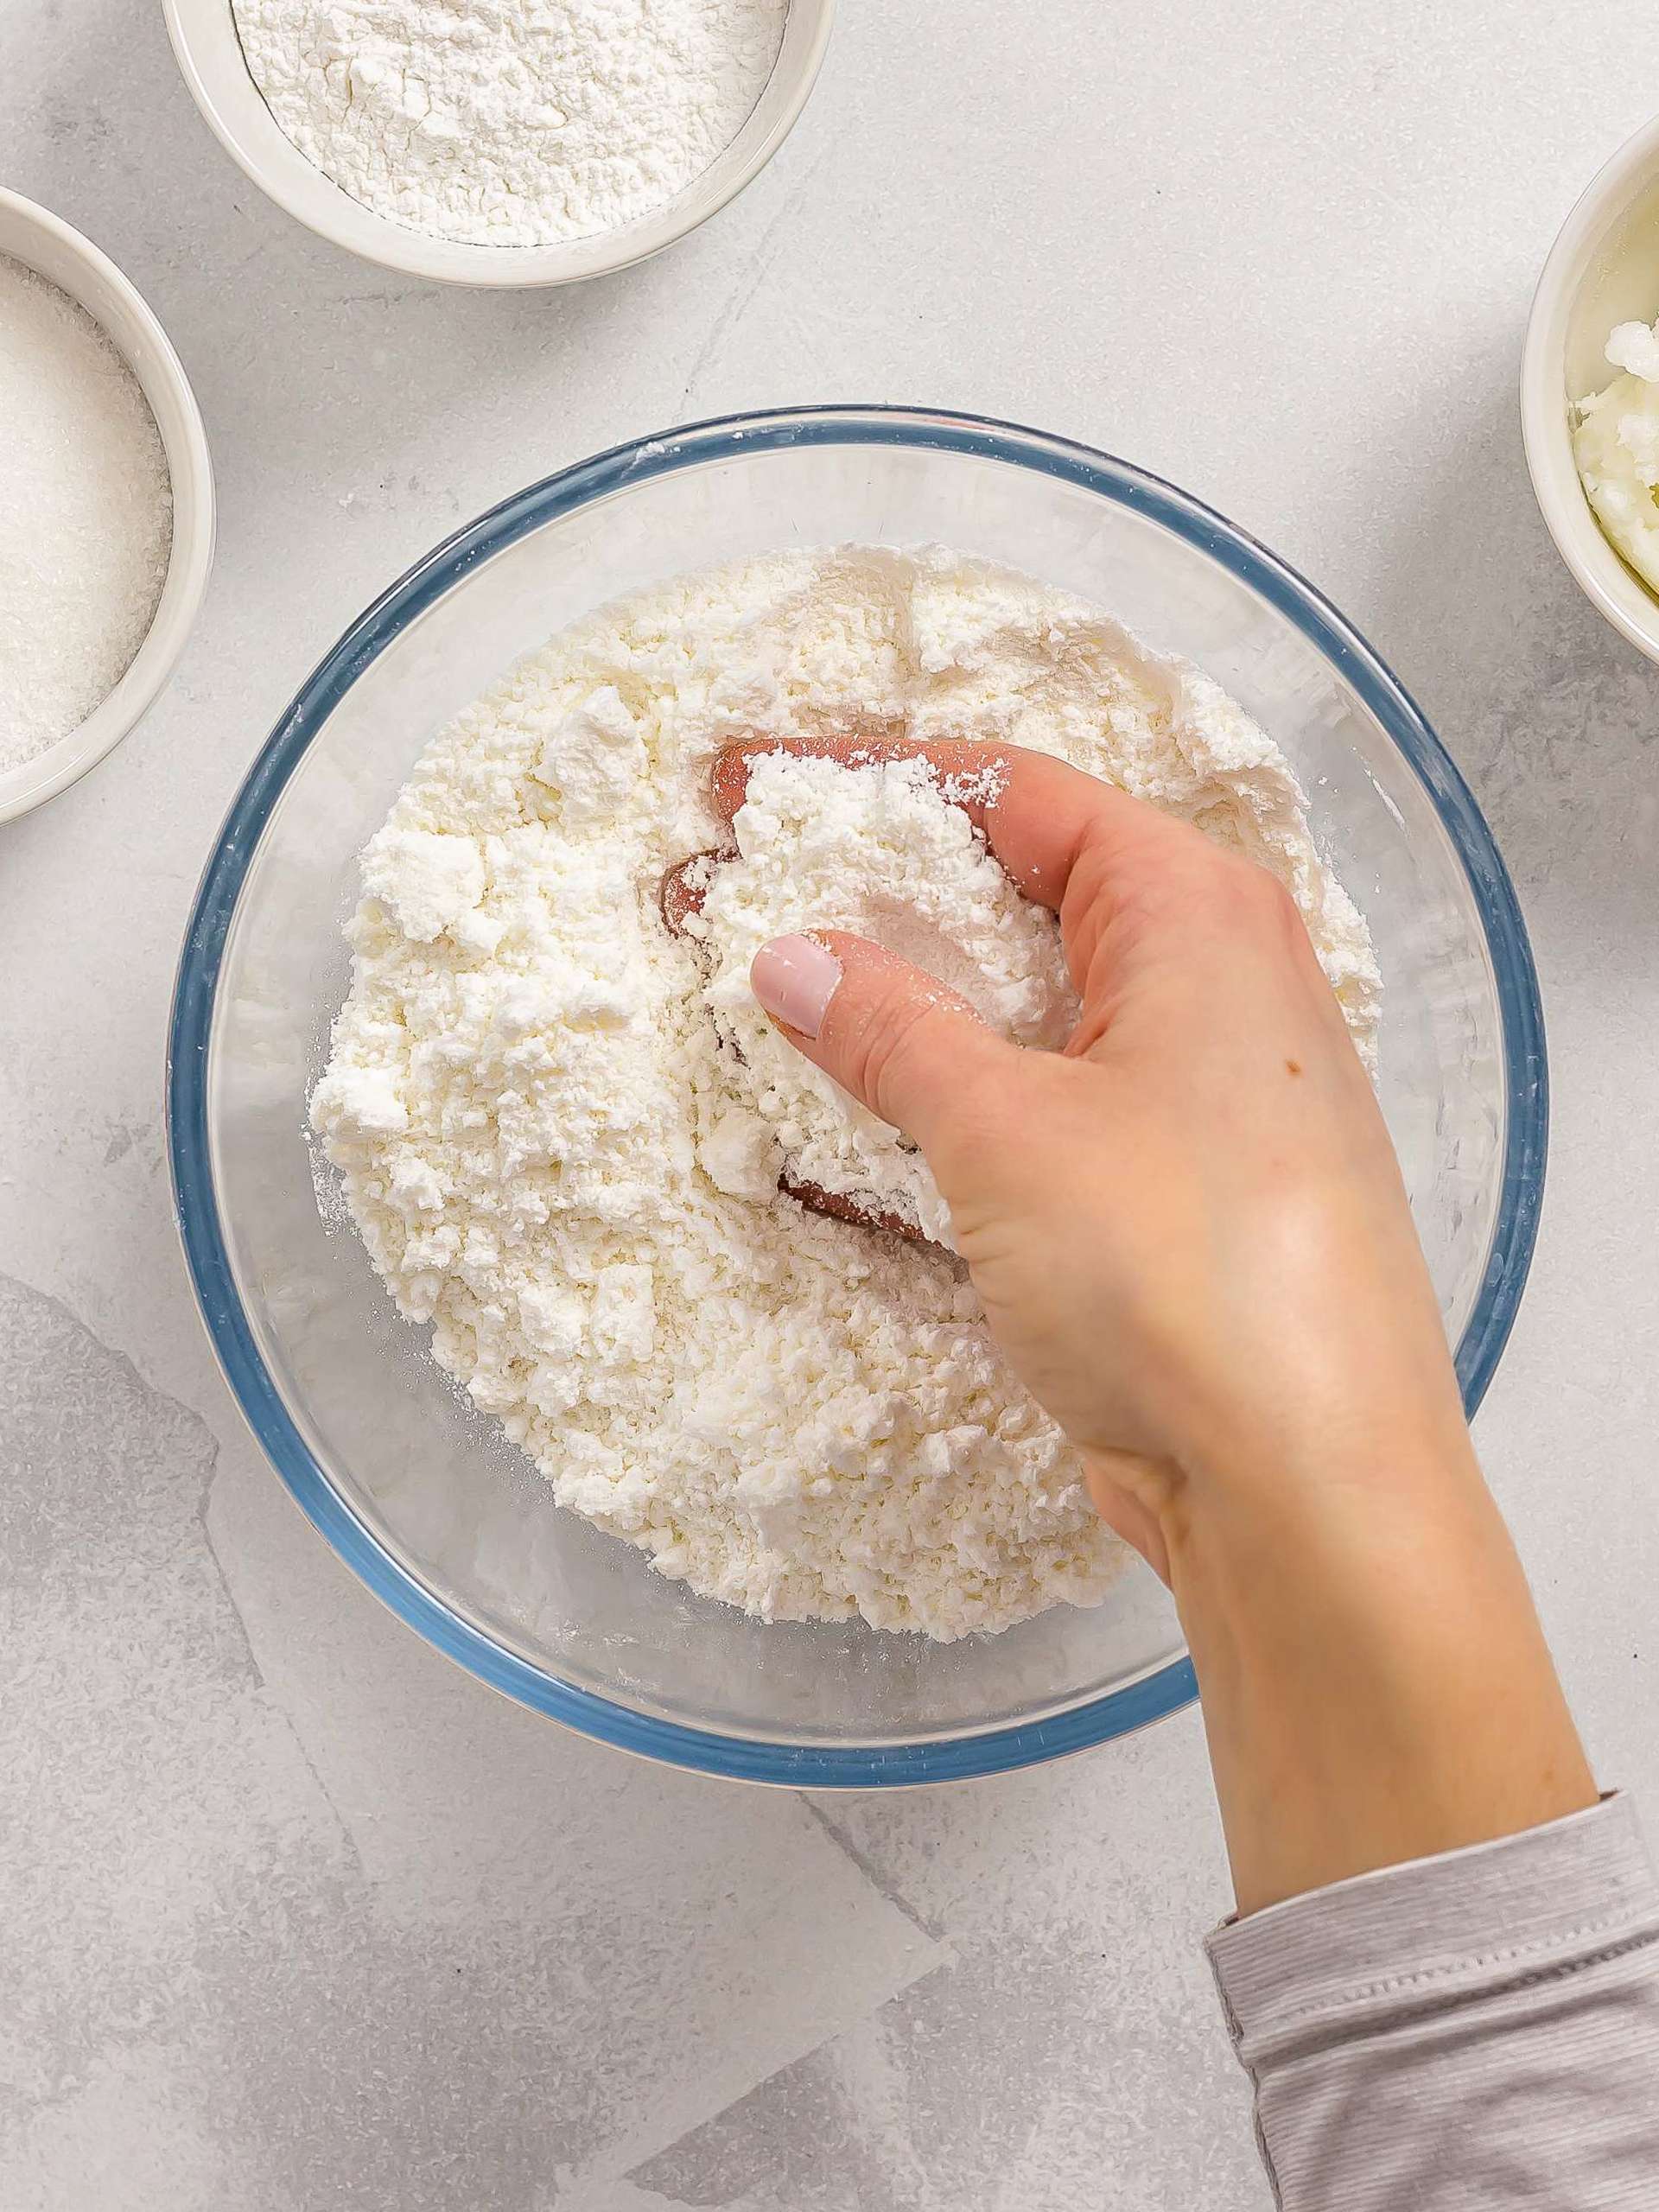 Mochi Flour vs Rice Flour: What's the Difference?